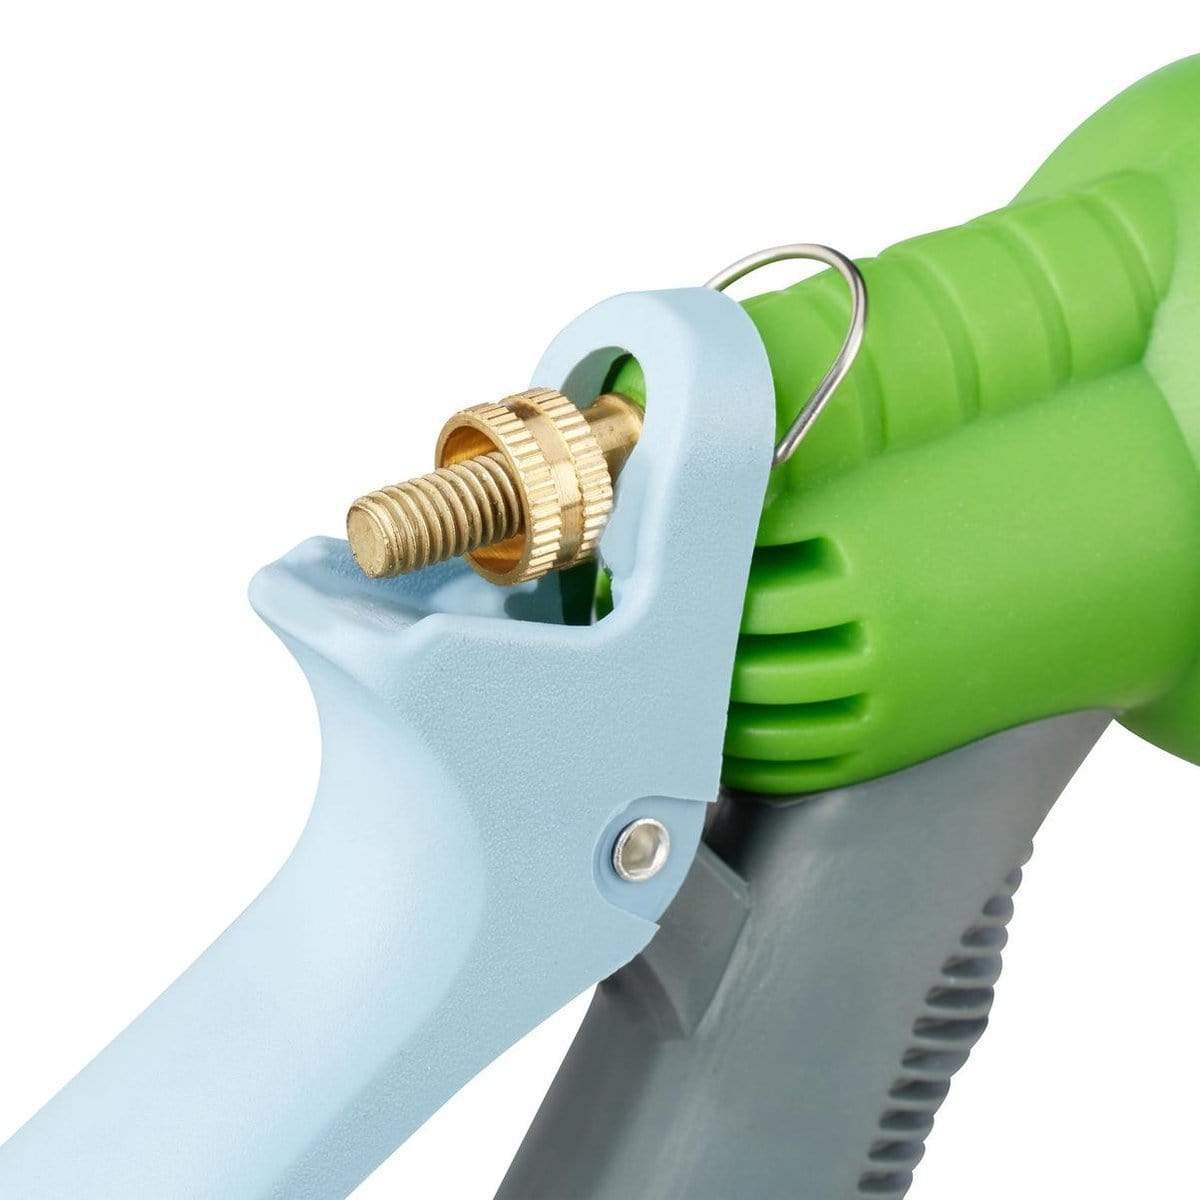 Hose Multifunctional Sprayer Head With 8 Functions - only5pounds.com